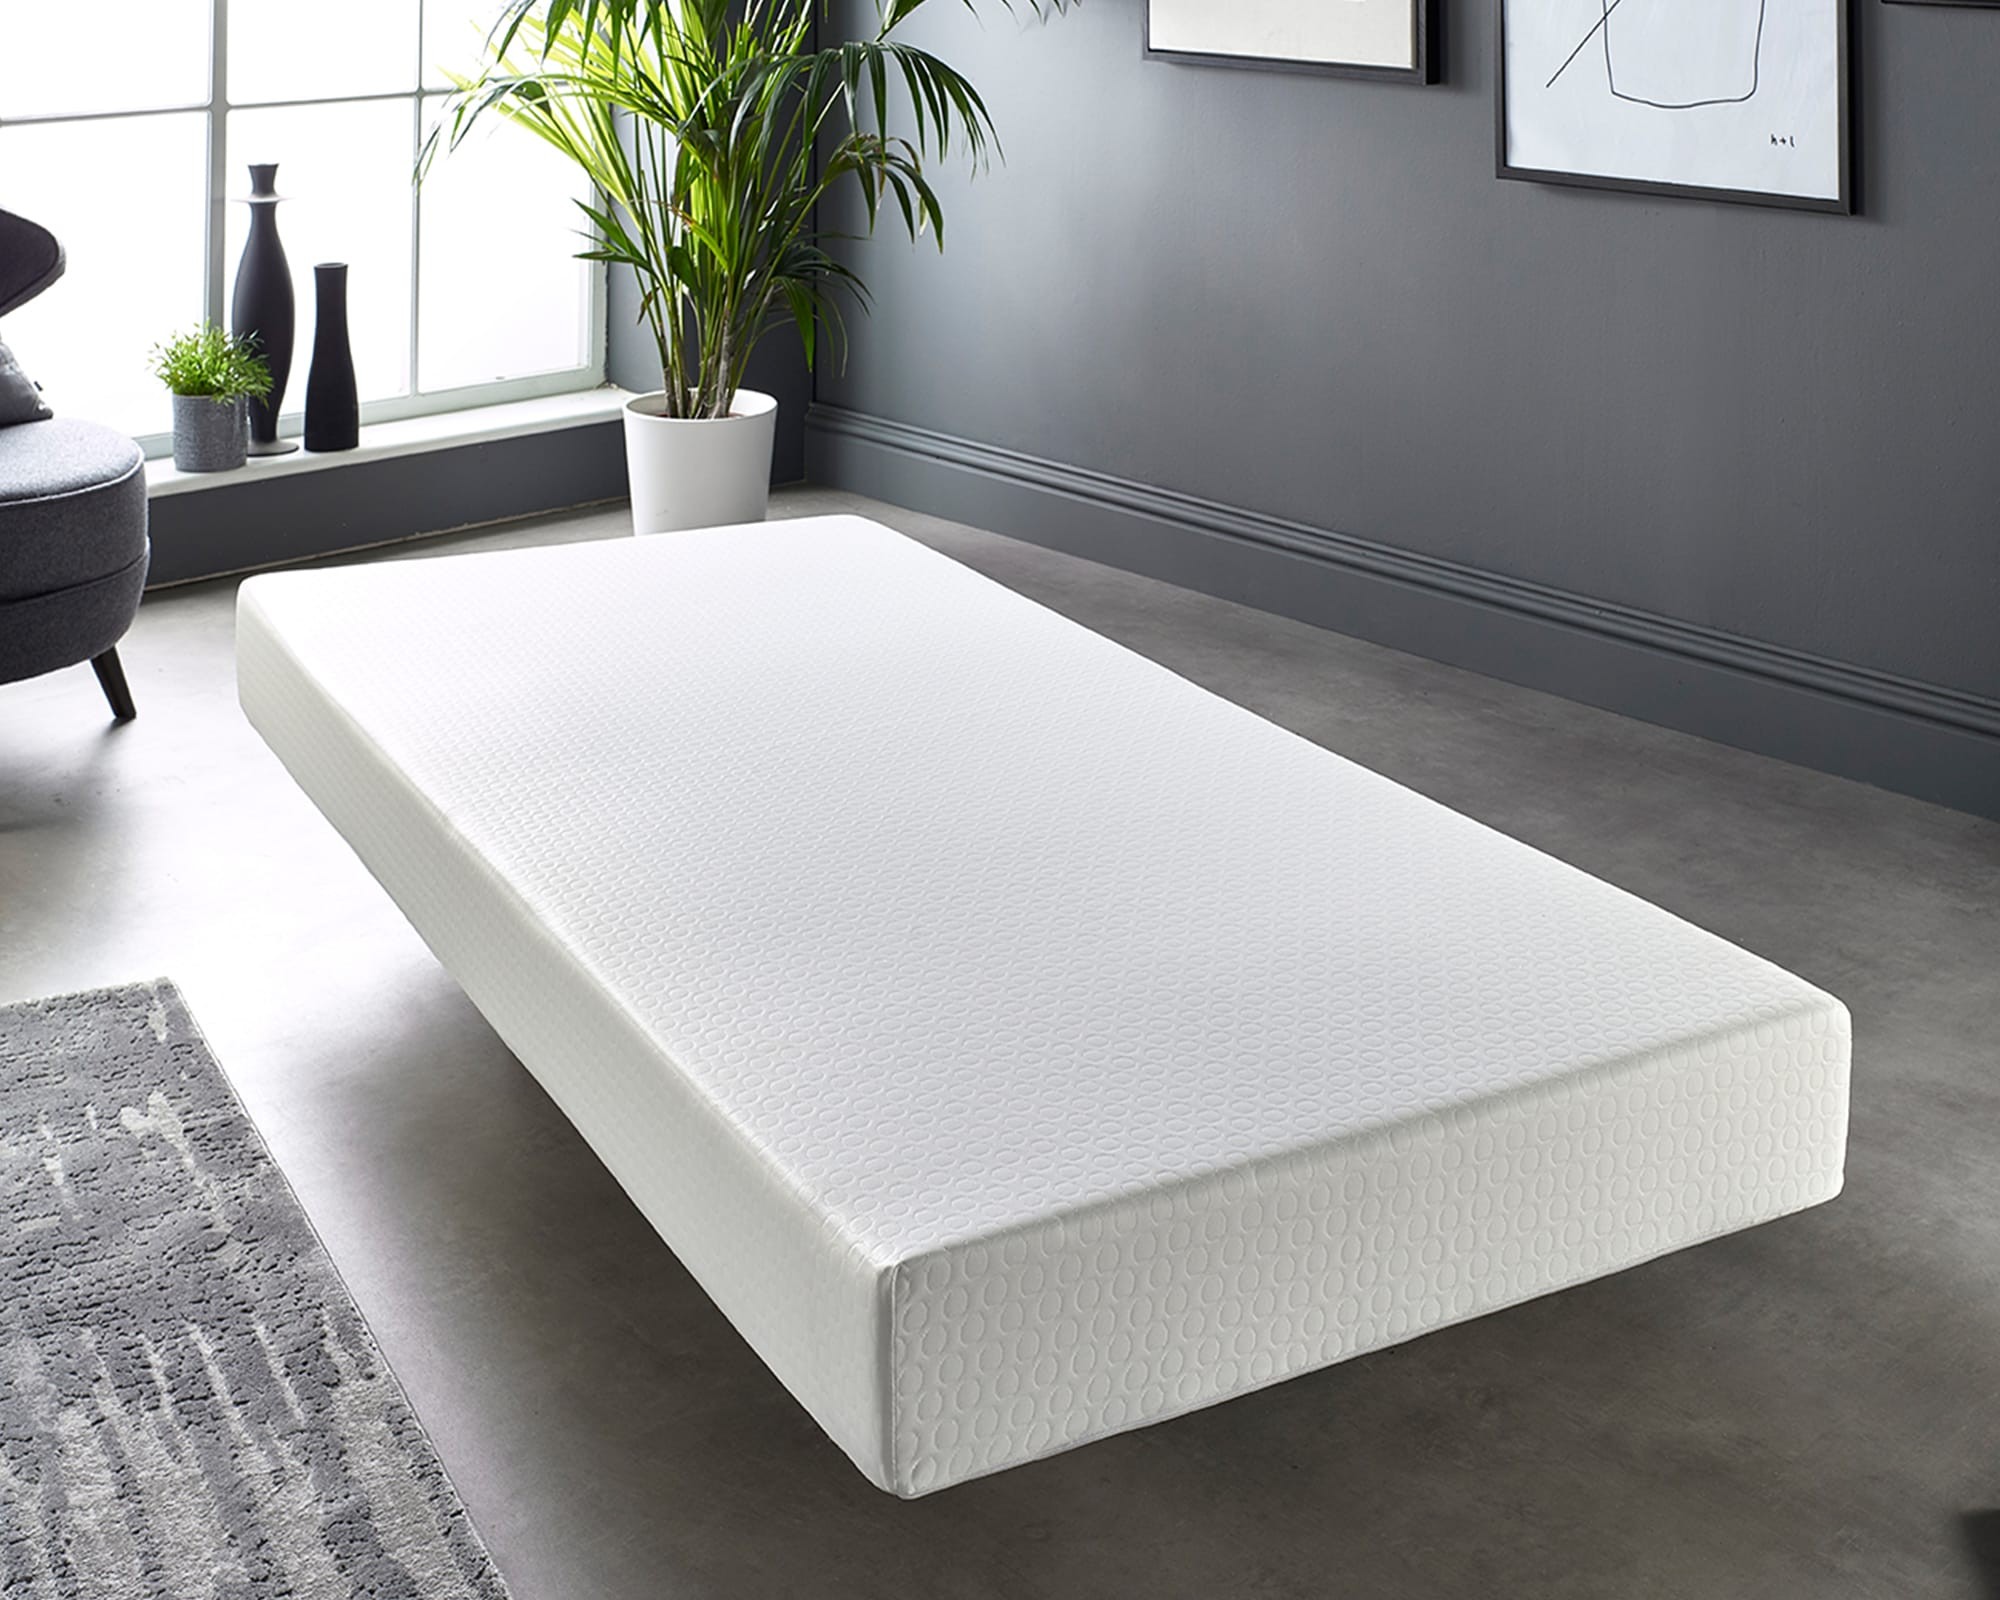 SUPERIOR MEMORY FOAM MATTRESS 2ft 3ft 4ft 5ft 6 SINGLE DOUBLE KING SUPER SMALL 